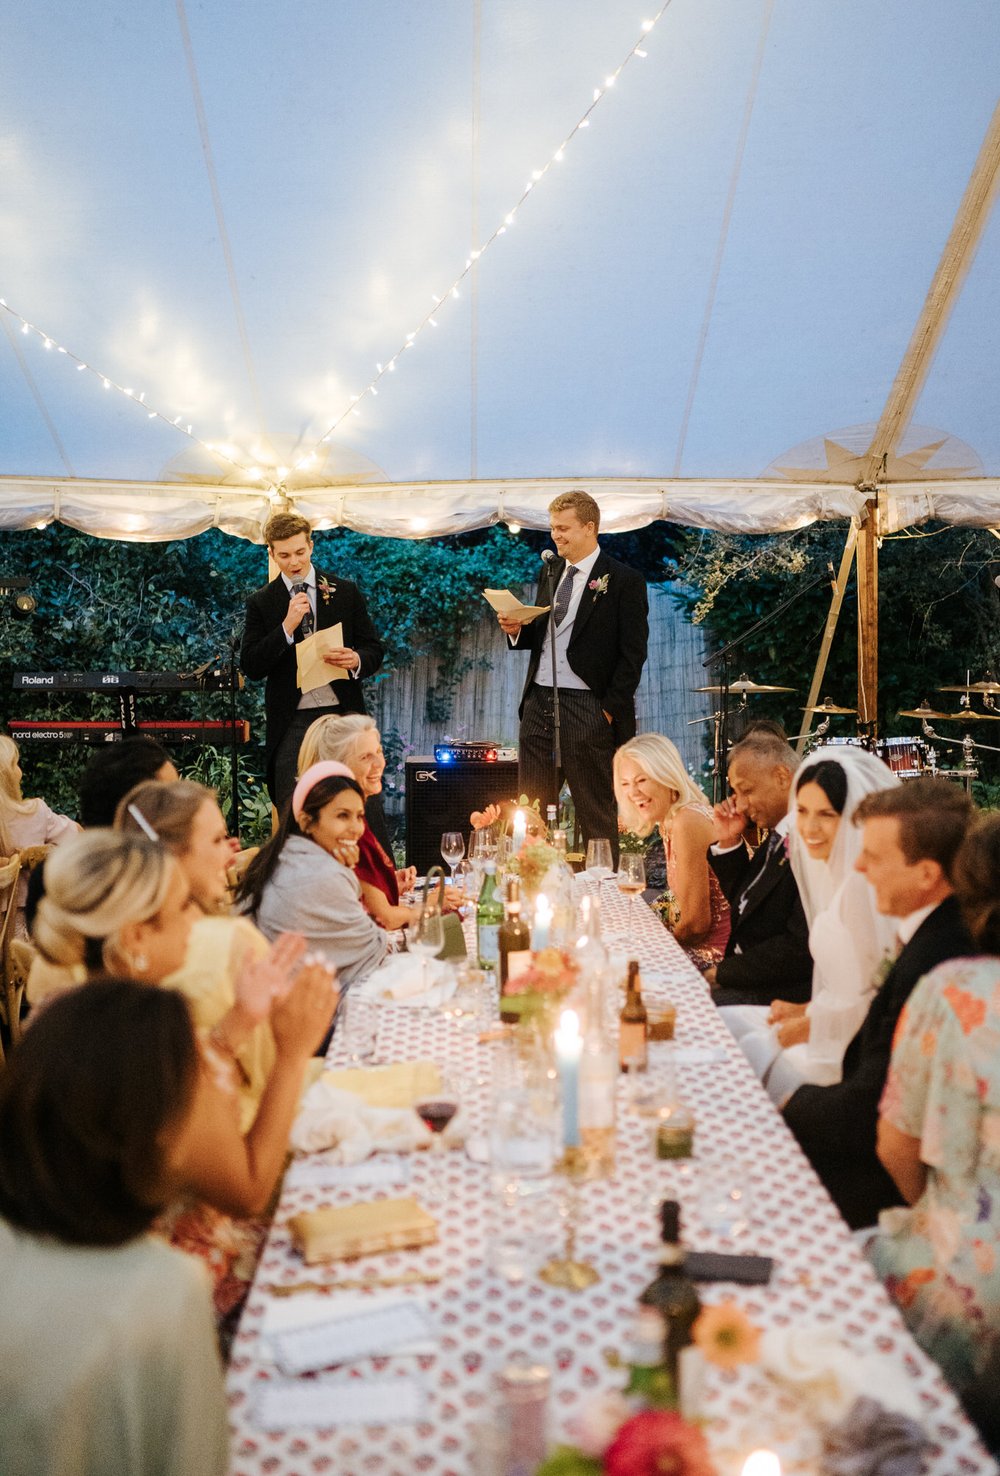 Groom's two brothers take stage and start delivering their speeches as guests laugh in this British garden wedding